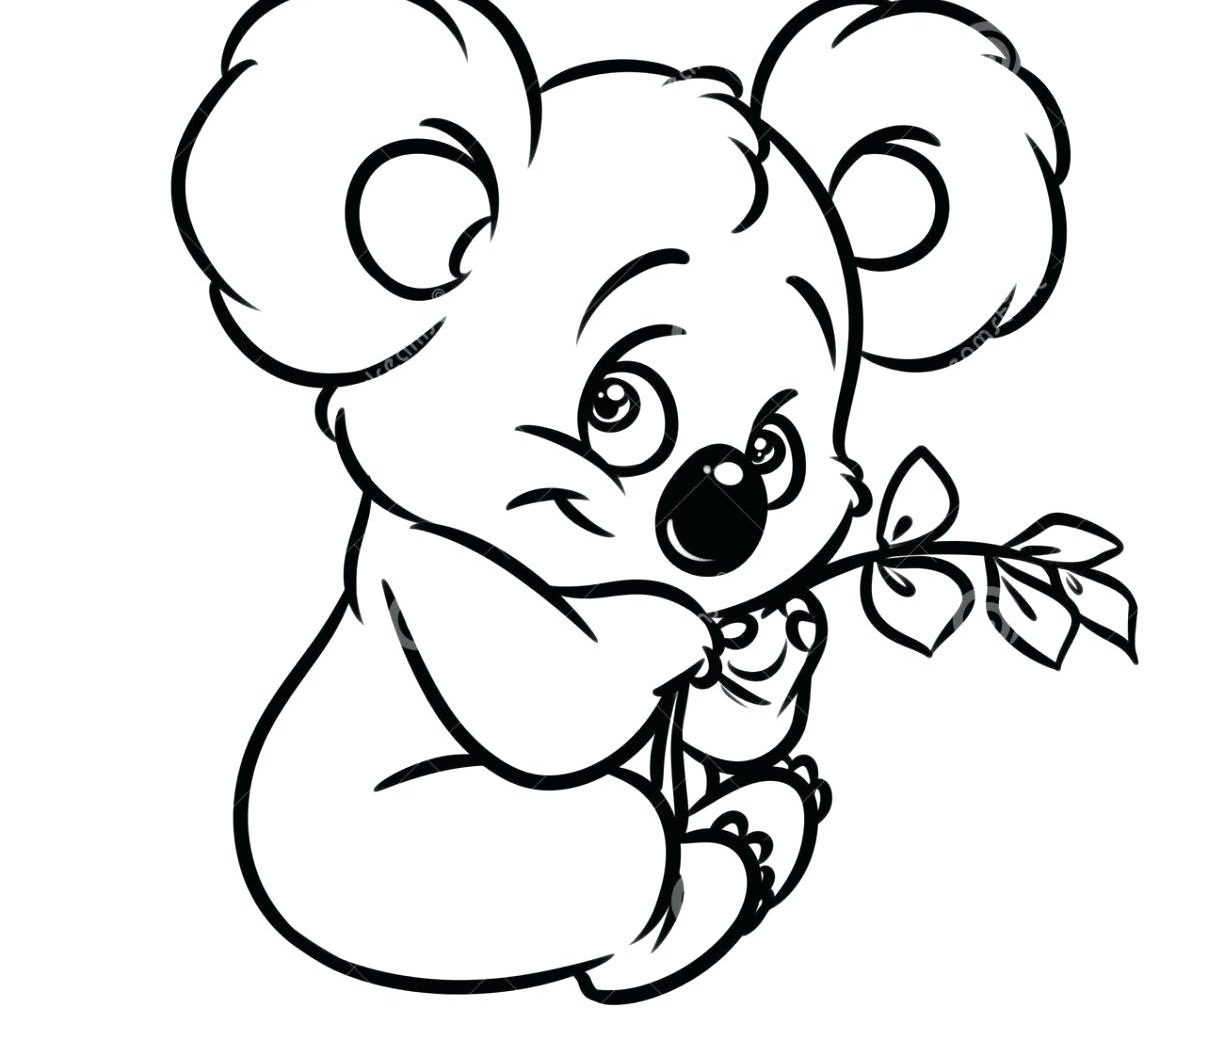 Cute Koala Coloring Pages For Adults - Pin on Fun for kids : Hang it on